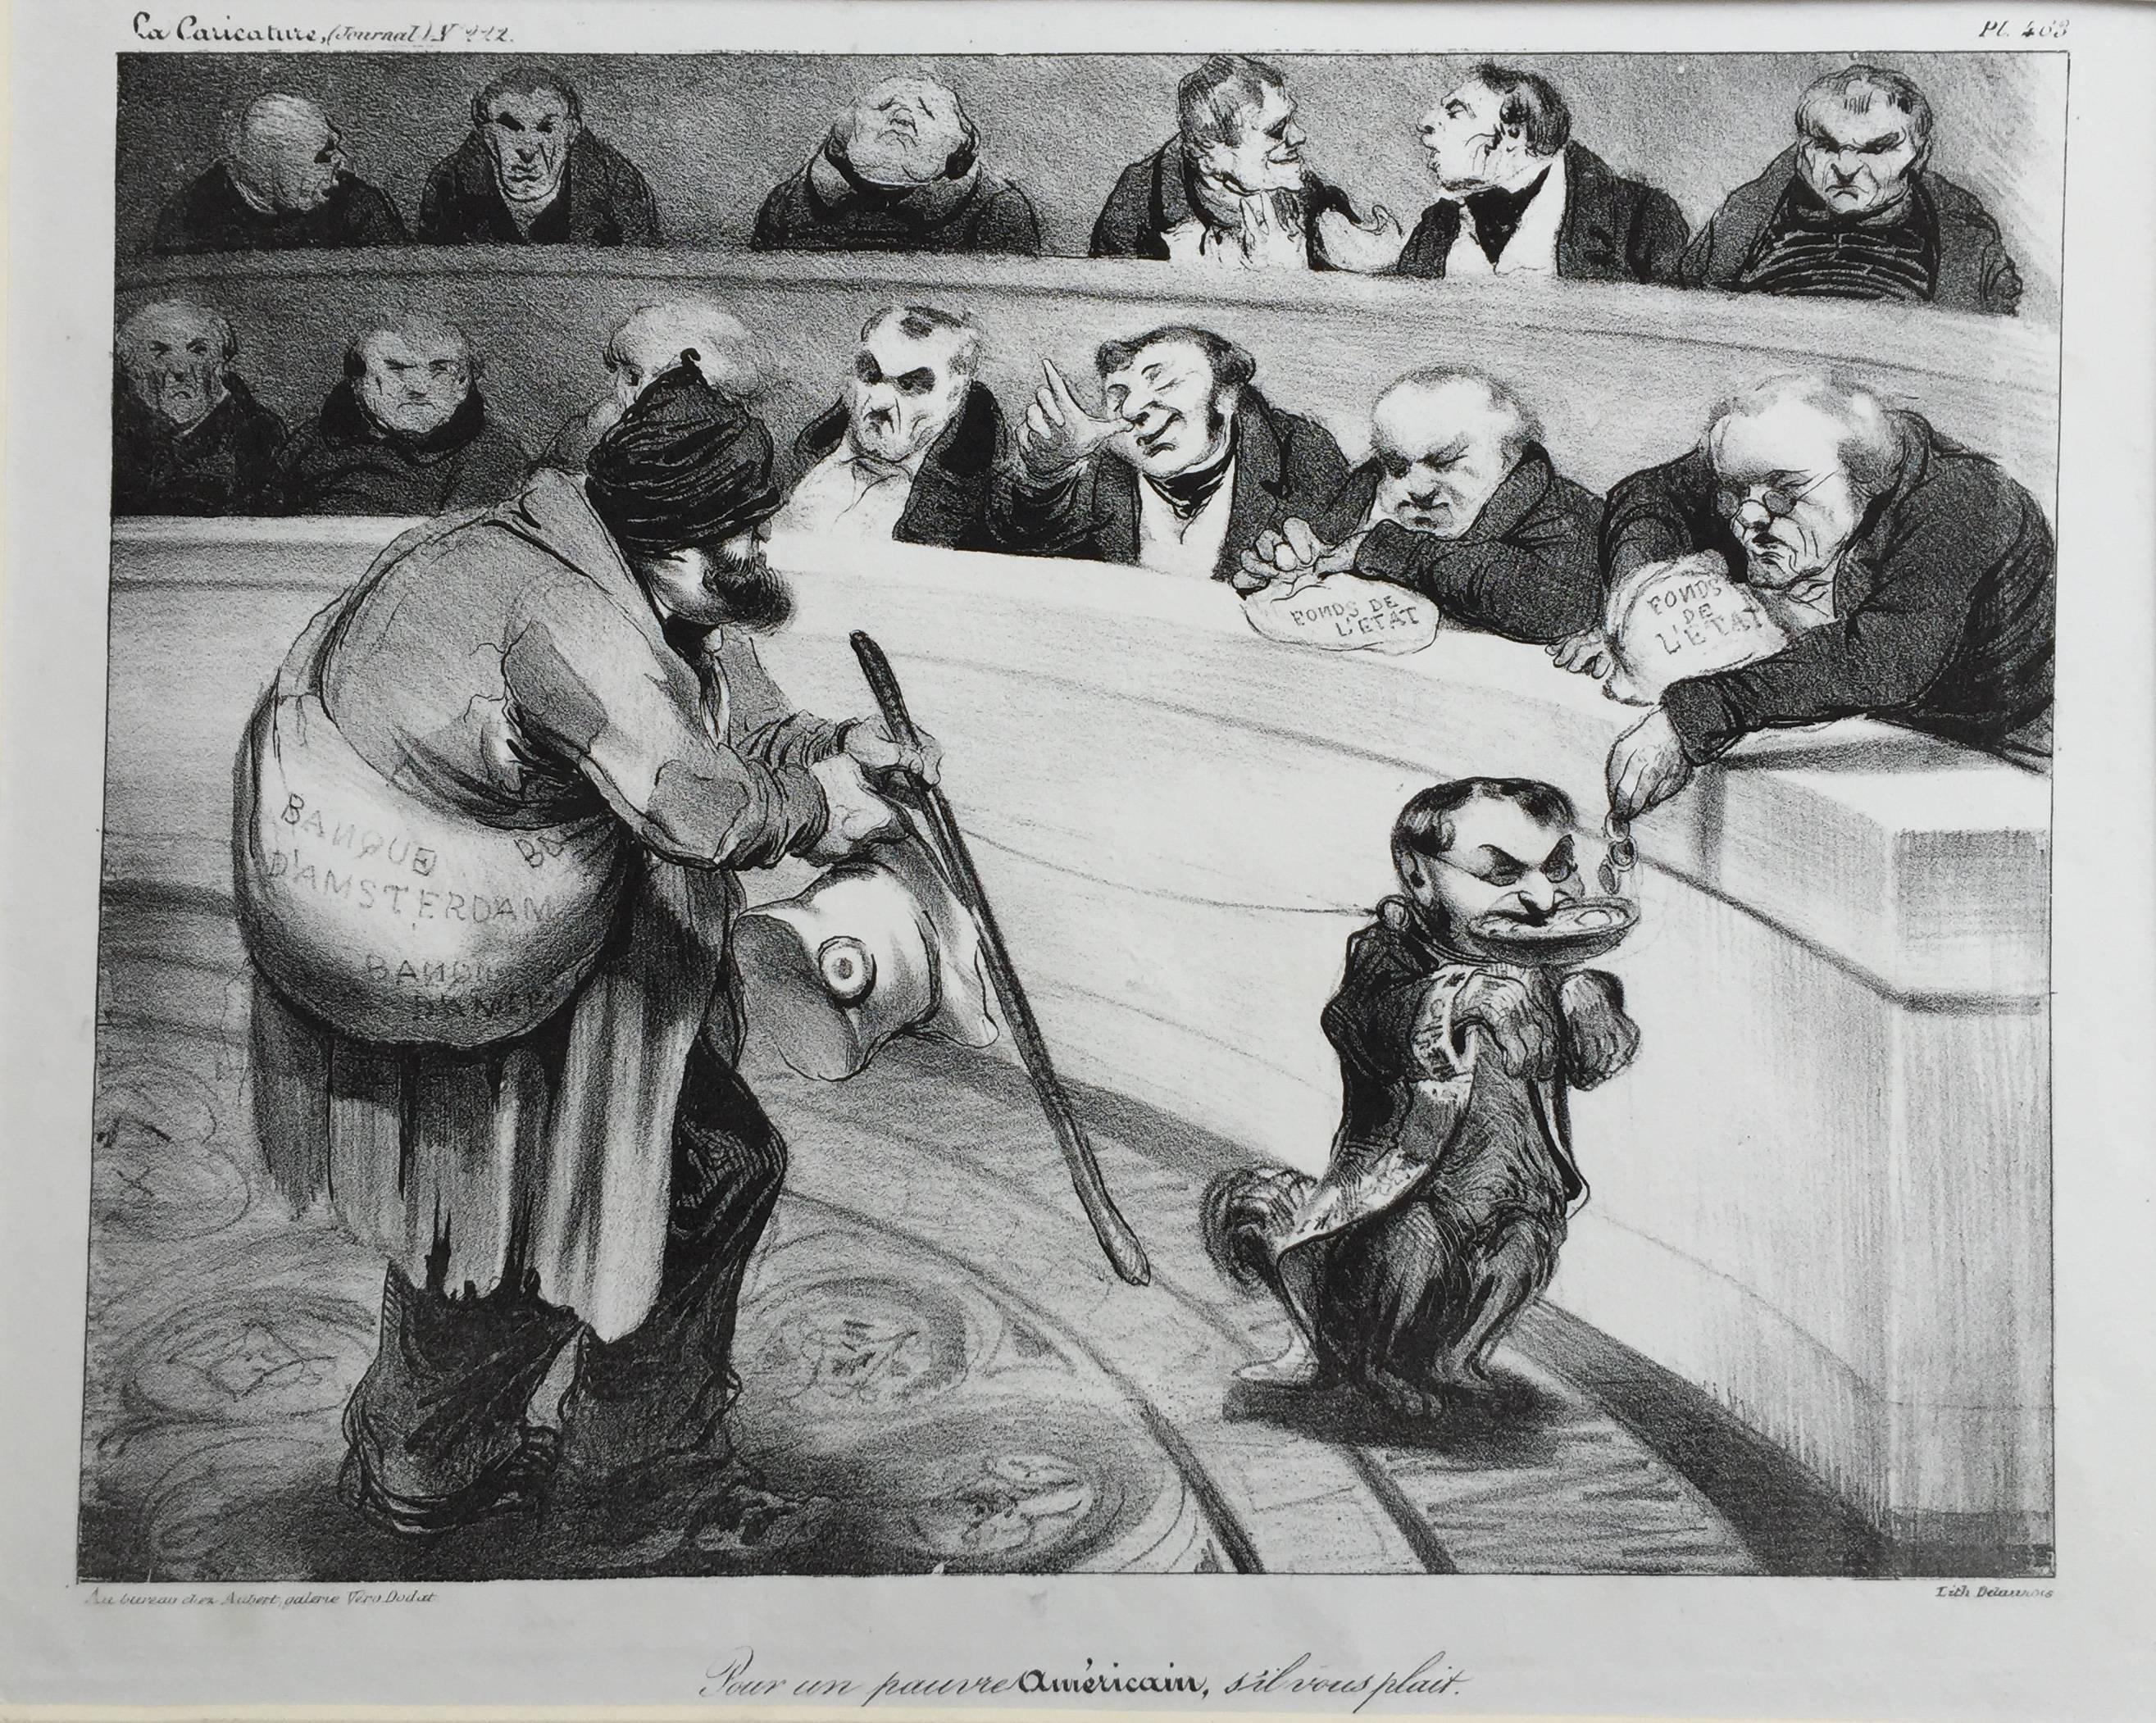 Honoré Daumier Figurative Print – FOR A POOR AMERICAN, PLEASE